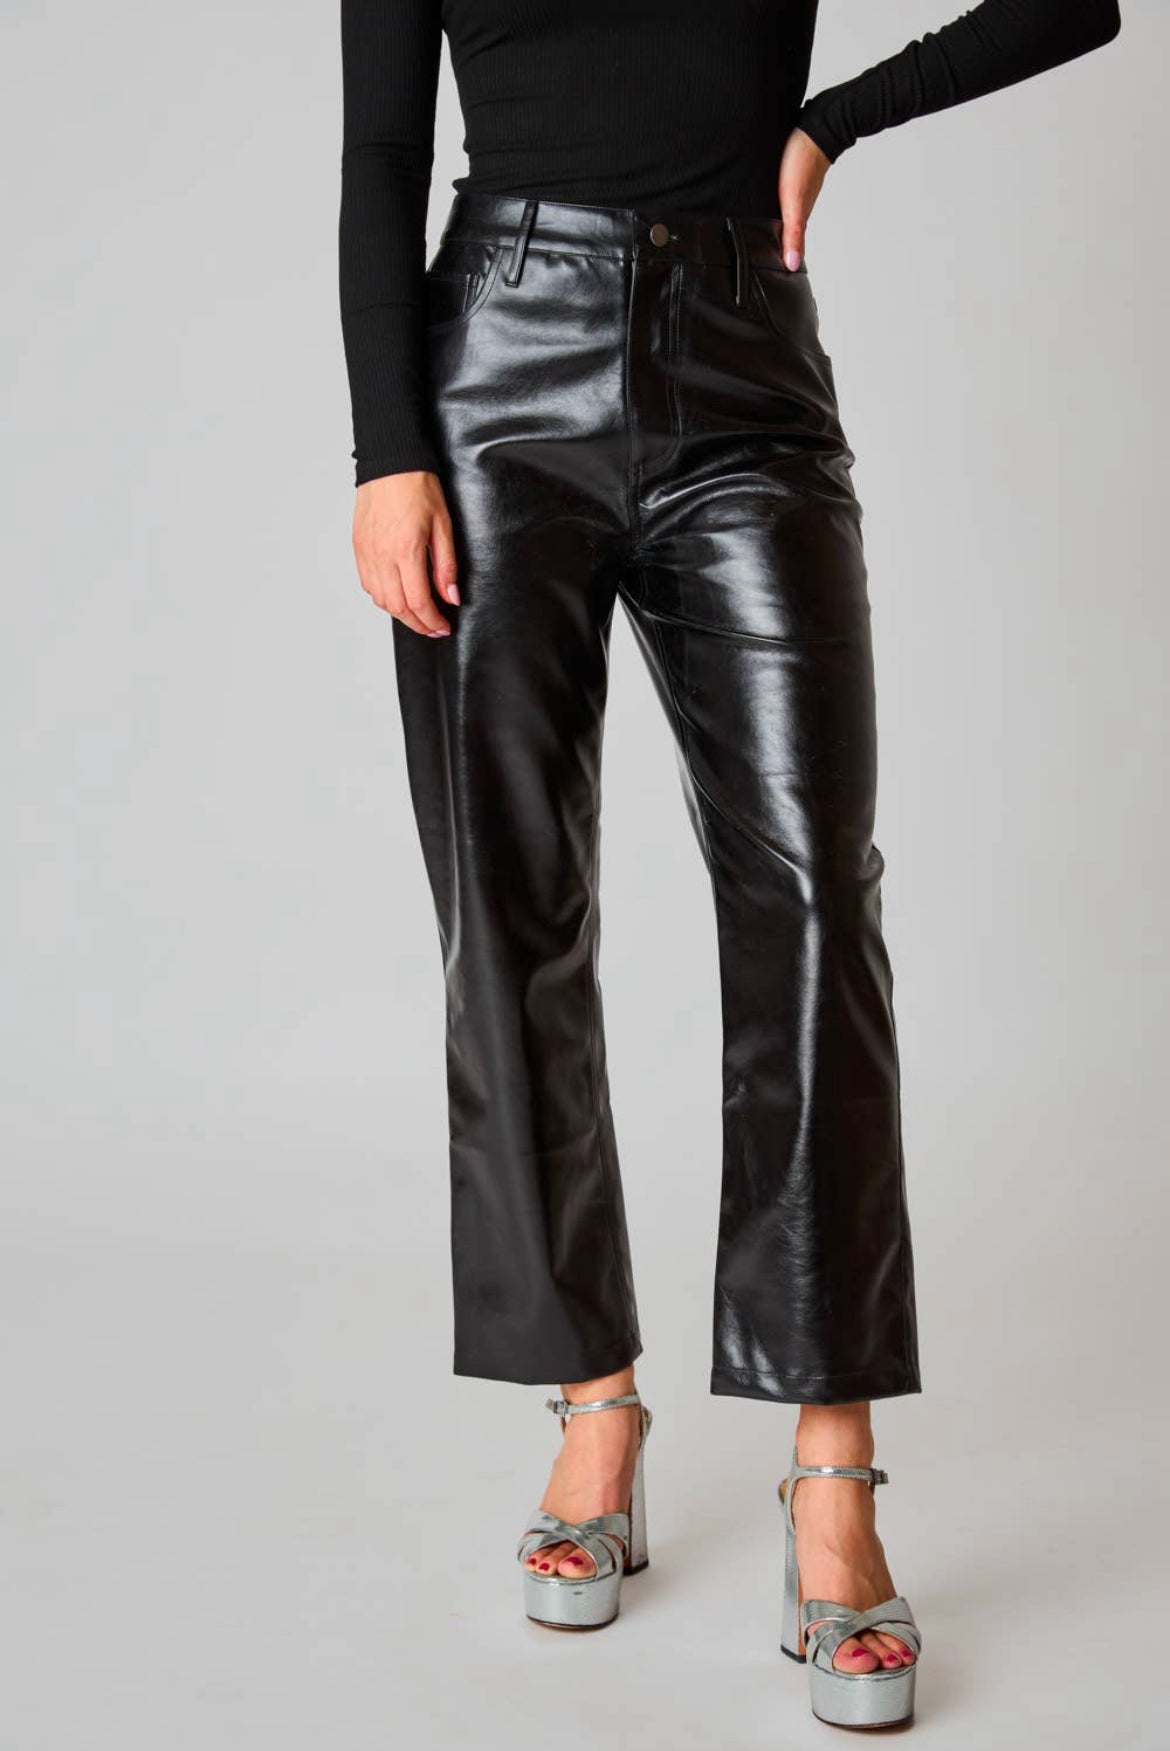 Buddy Love cropped black leather pants